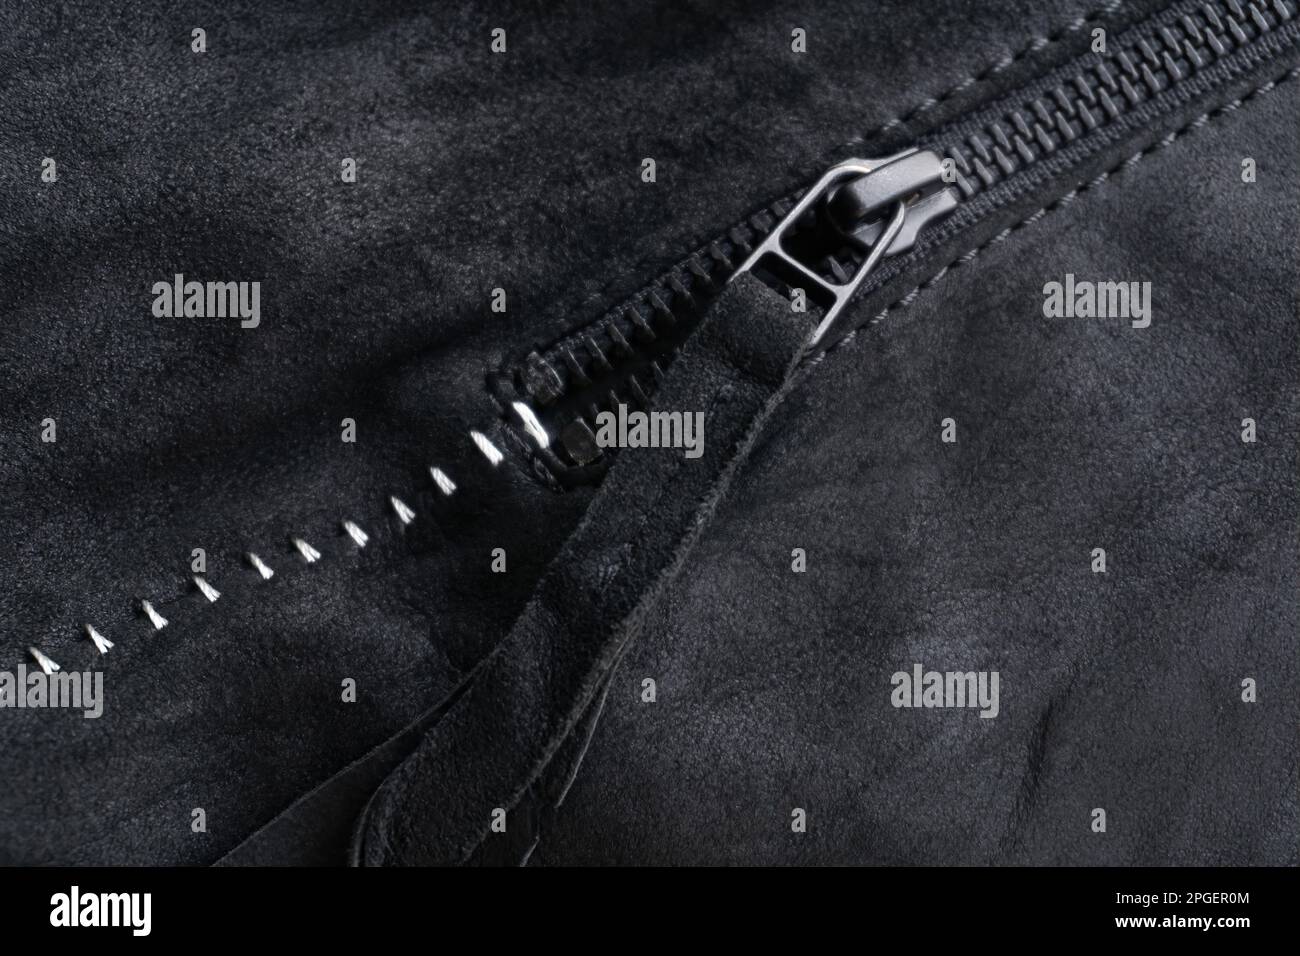 Zip with a tab on a black suede jacket with white contrasting seams background close up Stock Photo